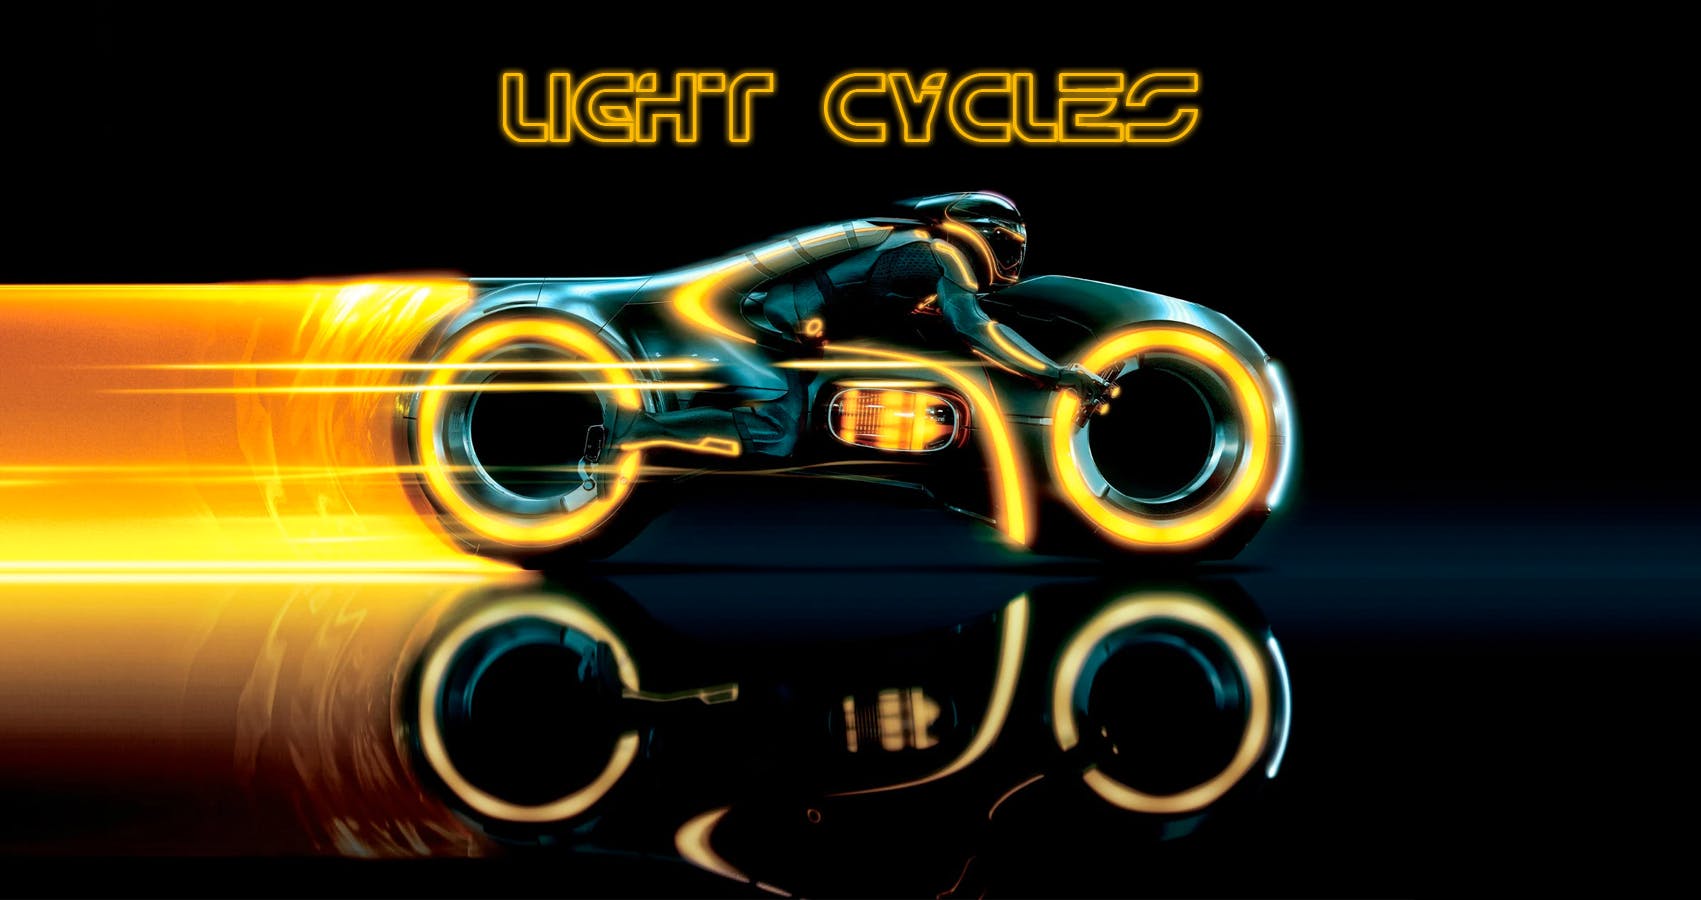 Light Cycles title and lightcycle